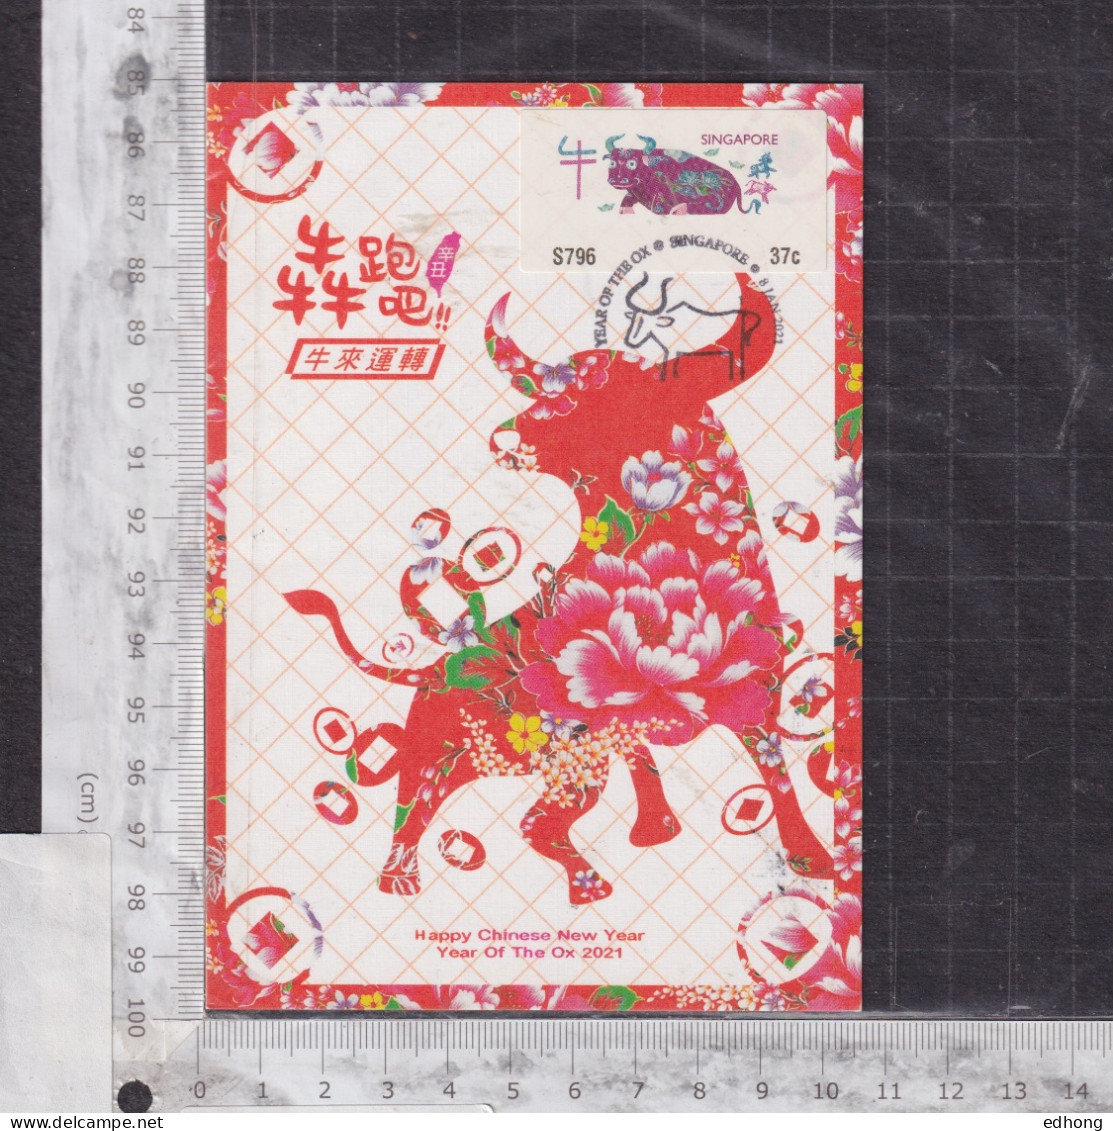 [Carte Maximum / Maximum Card / Maximumkarte] Singapore 2021 | Lunar New Year, Year Of The Ox Postage Label - Nouvel An Chinois